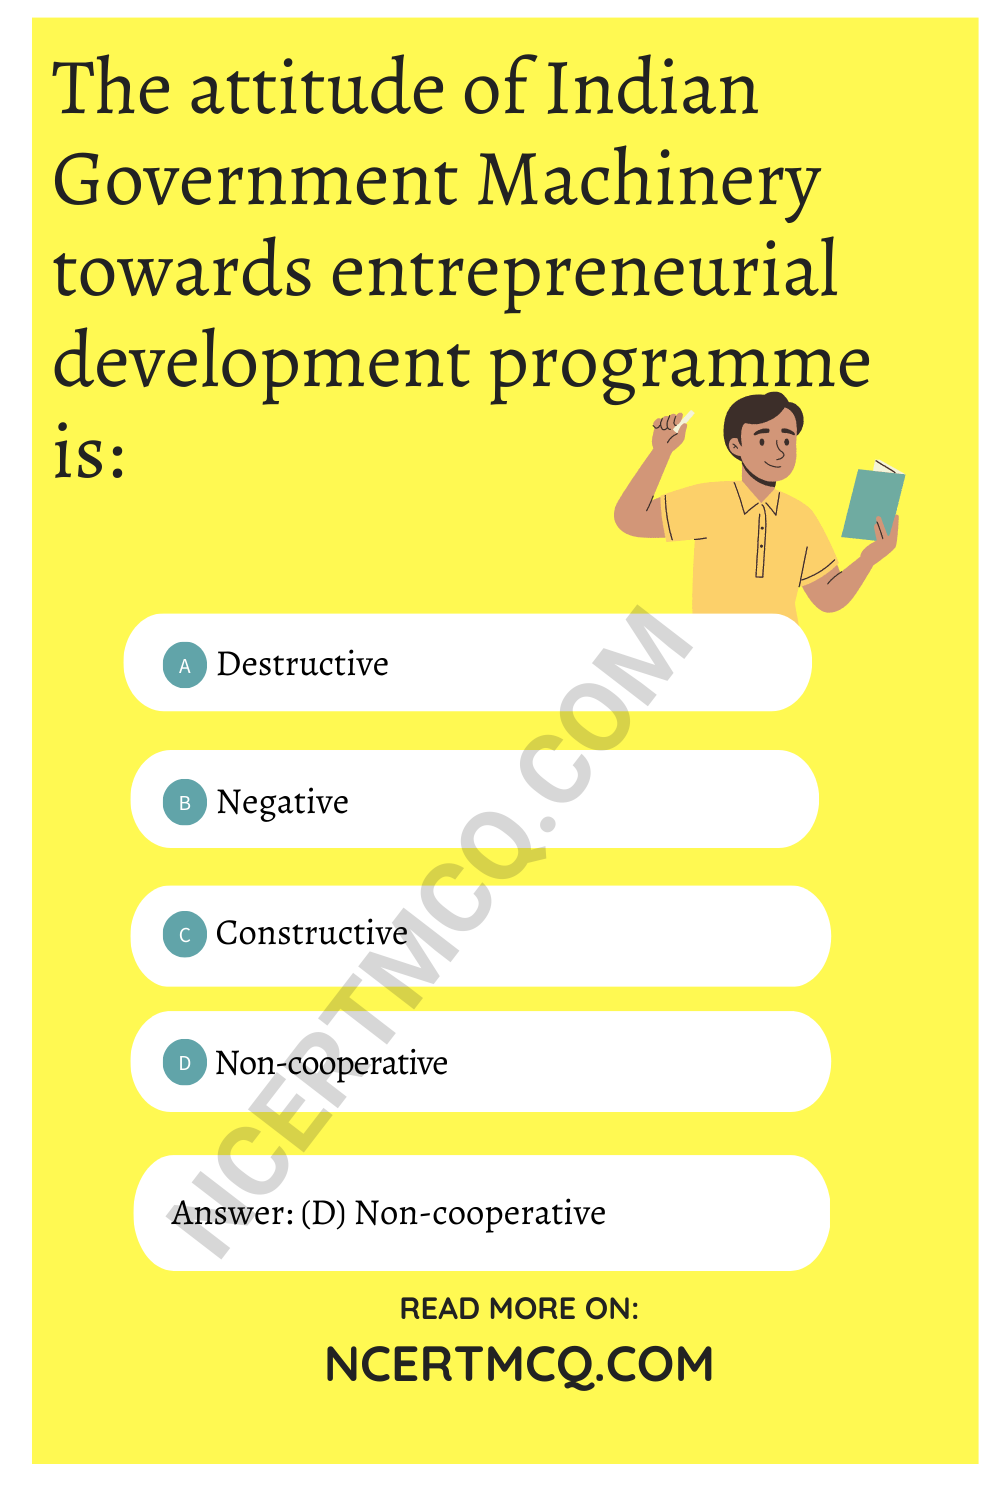 The attitude of Indian Government Machinery towards entrepreneurial development programme is: